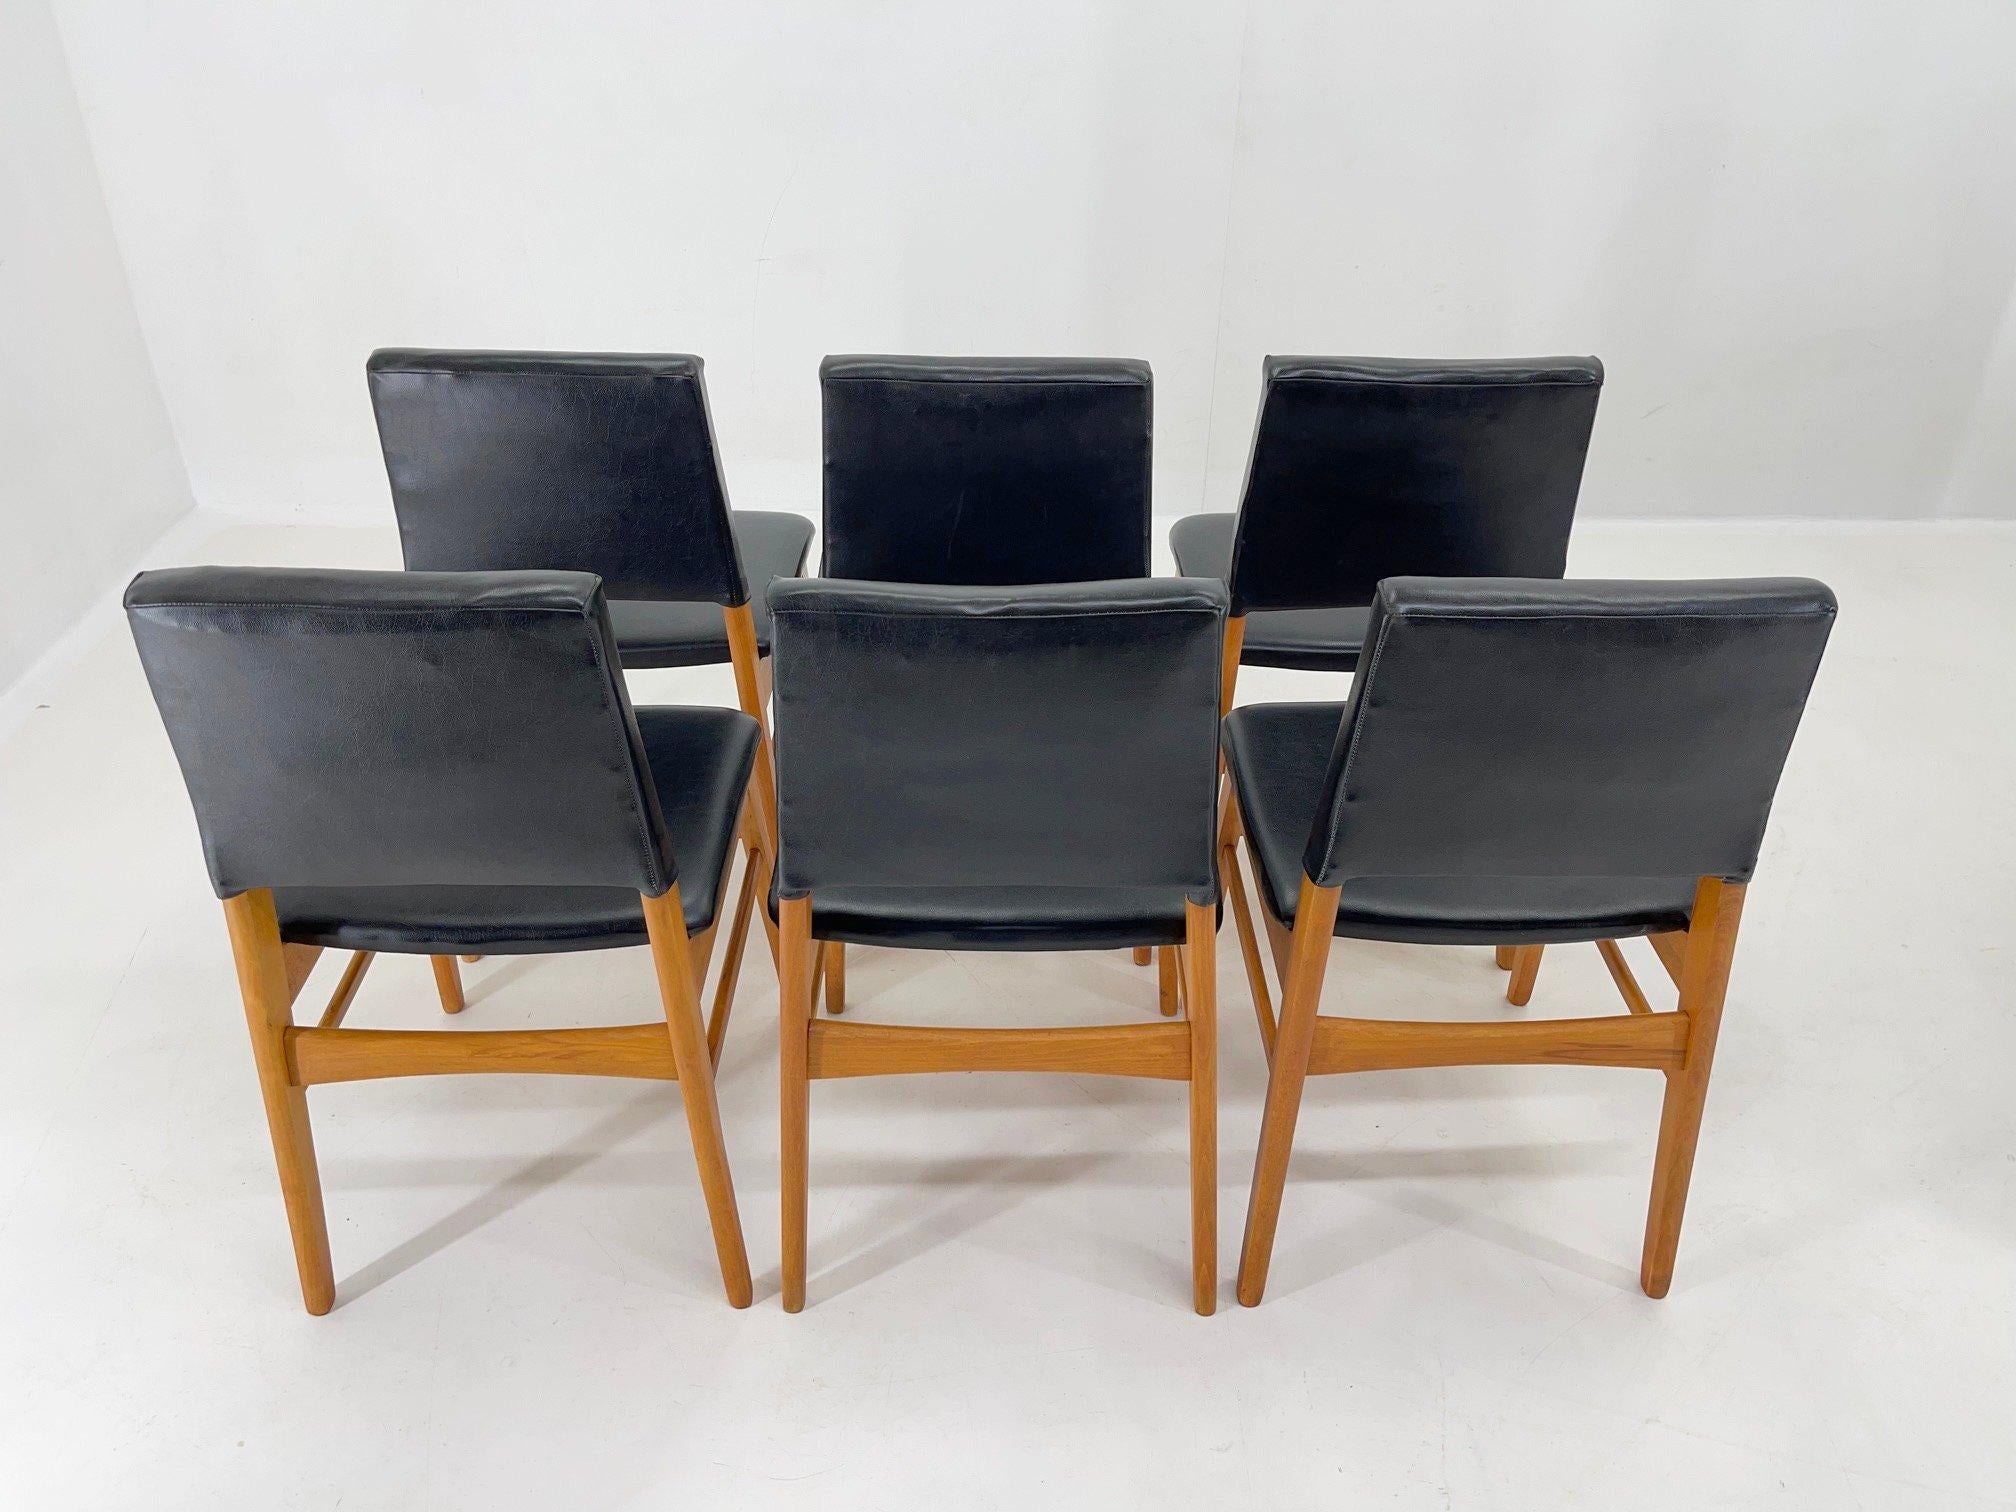 Mid-20th Century Set of 6 Leatherette & Wood Chairs, Czechoslovakia, 1960's For Sale